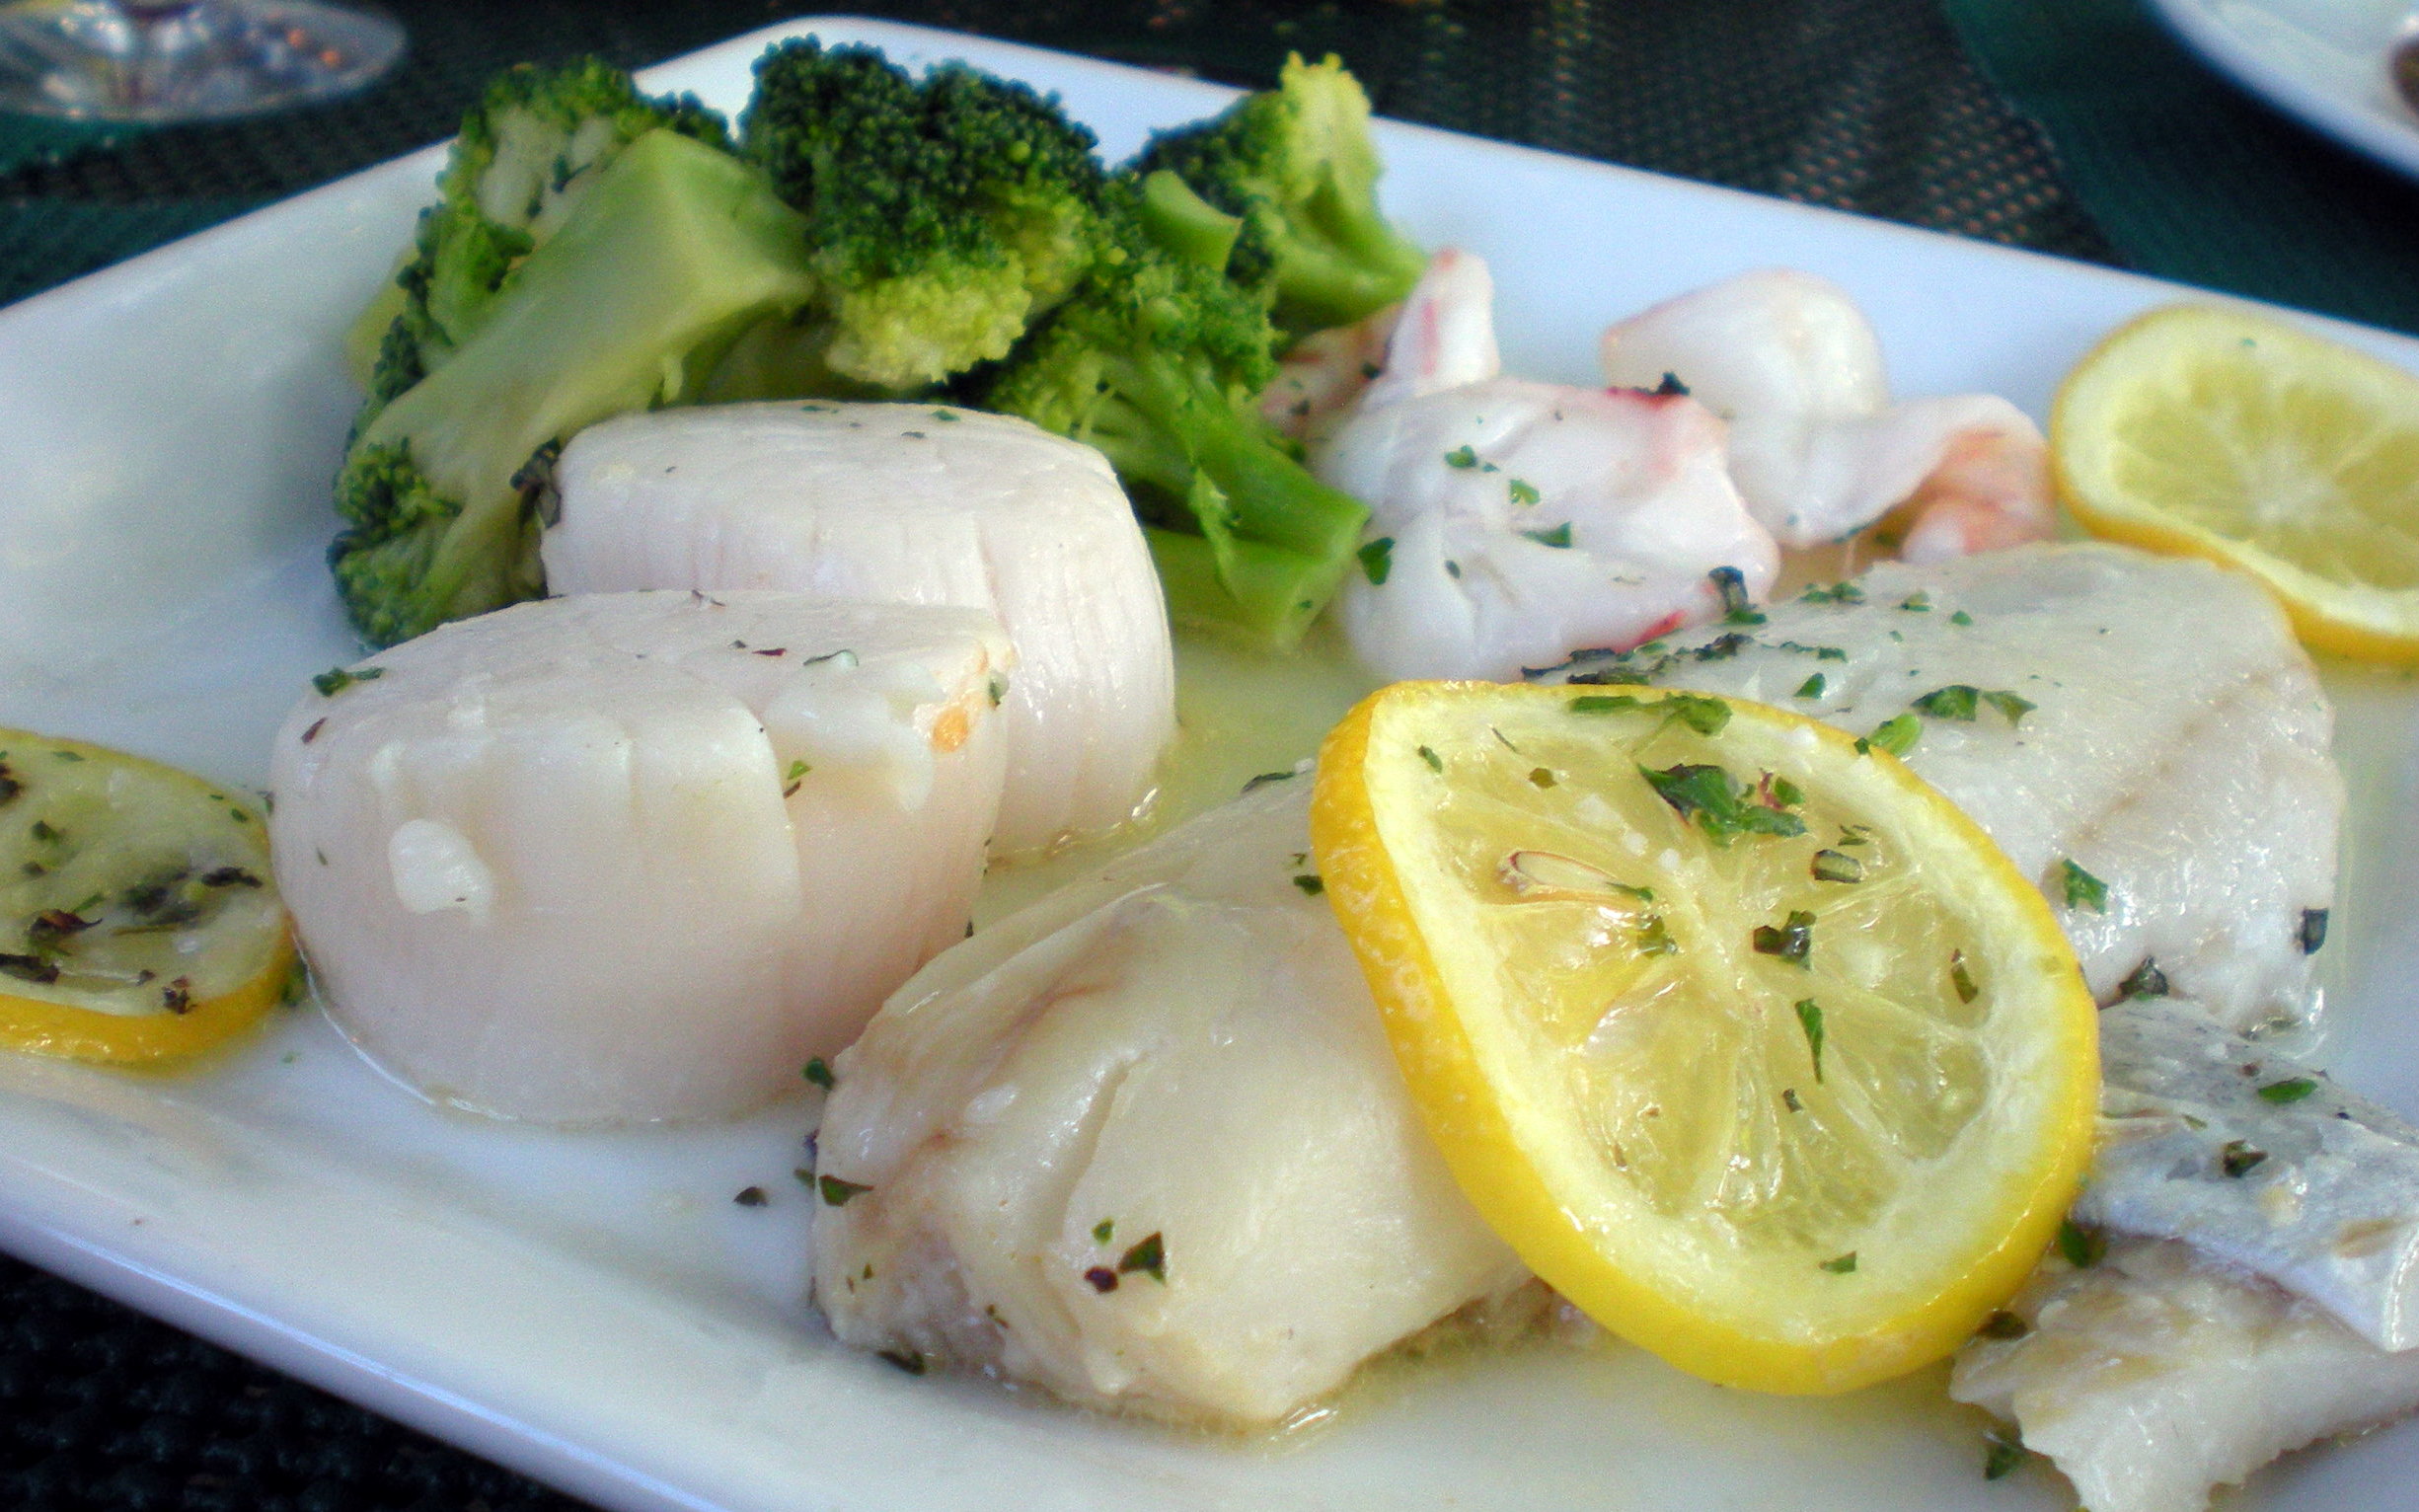 The Broiled Seafood Special: Large piece of fresh haddock, 2 large sweet and moist scallops, 2 butterflied shrimp served with steamed broccoli. EXCELLENT! It was done so you simply enjoyed the fresh sweetness of the seafood and no heavy sauce. 